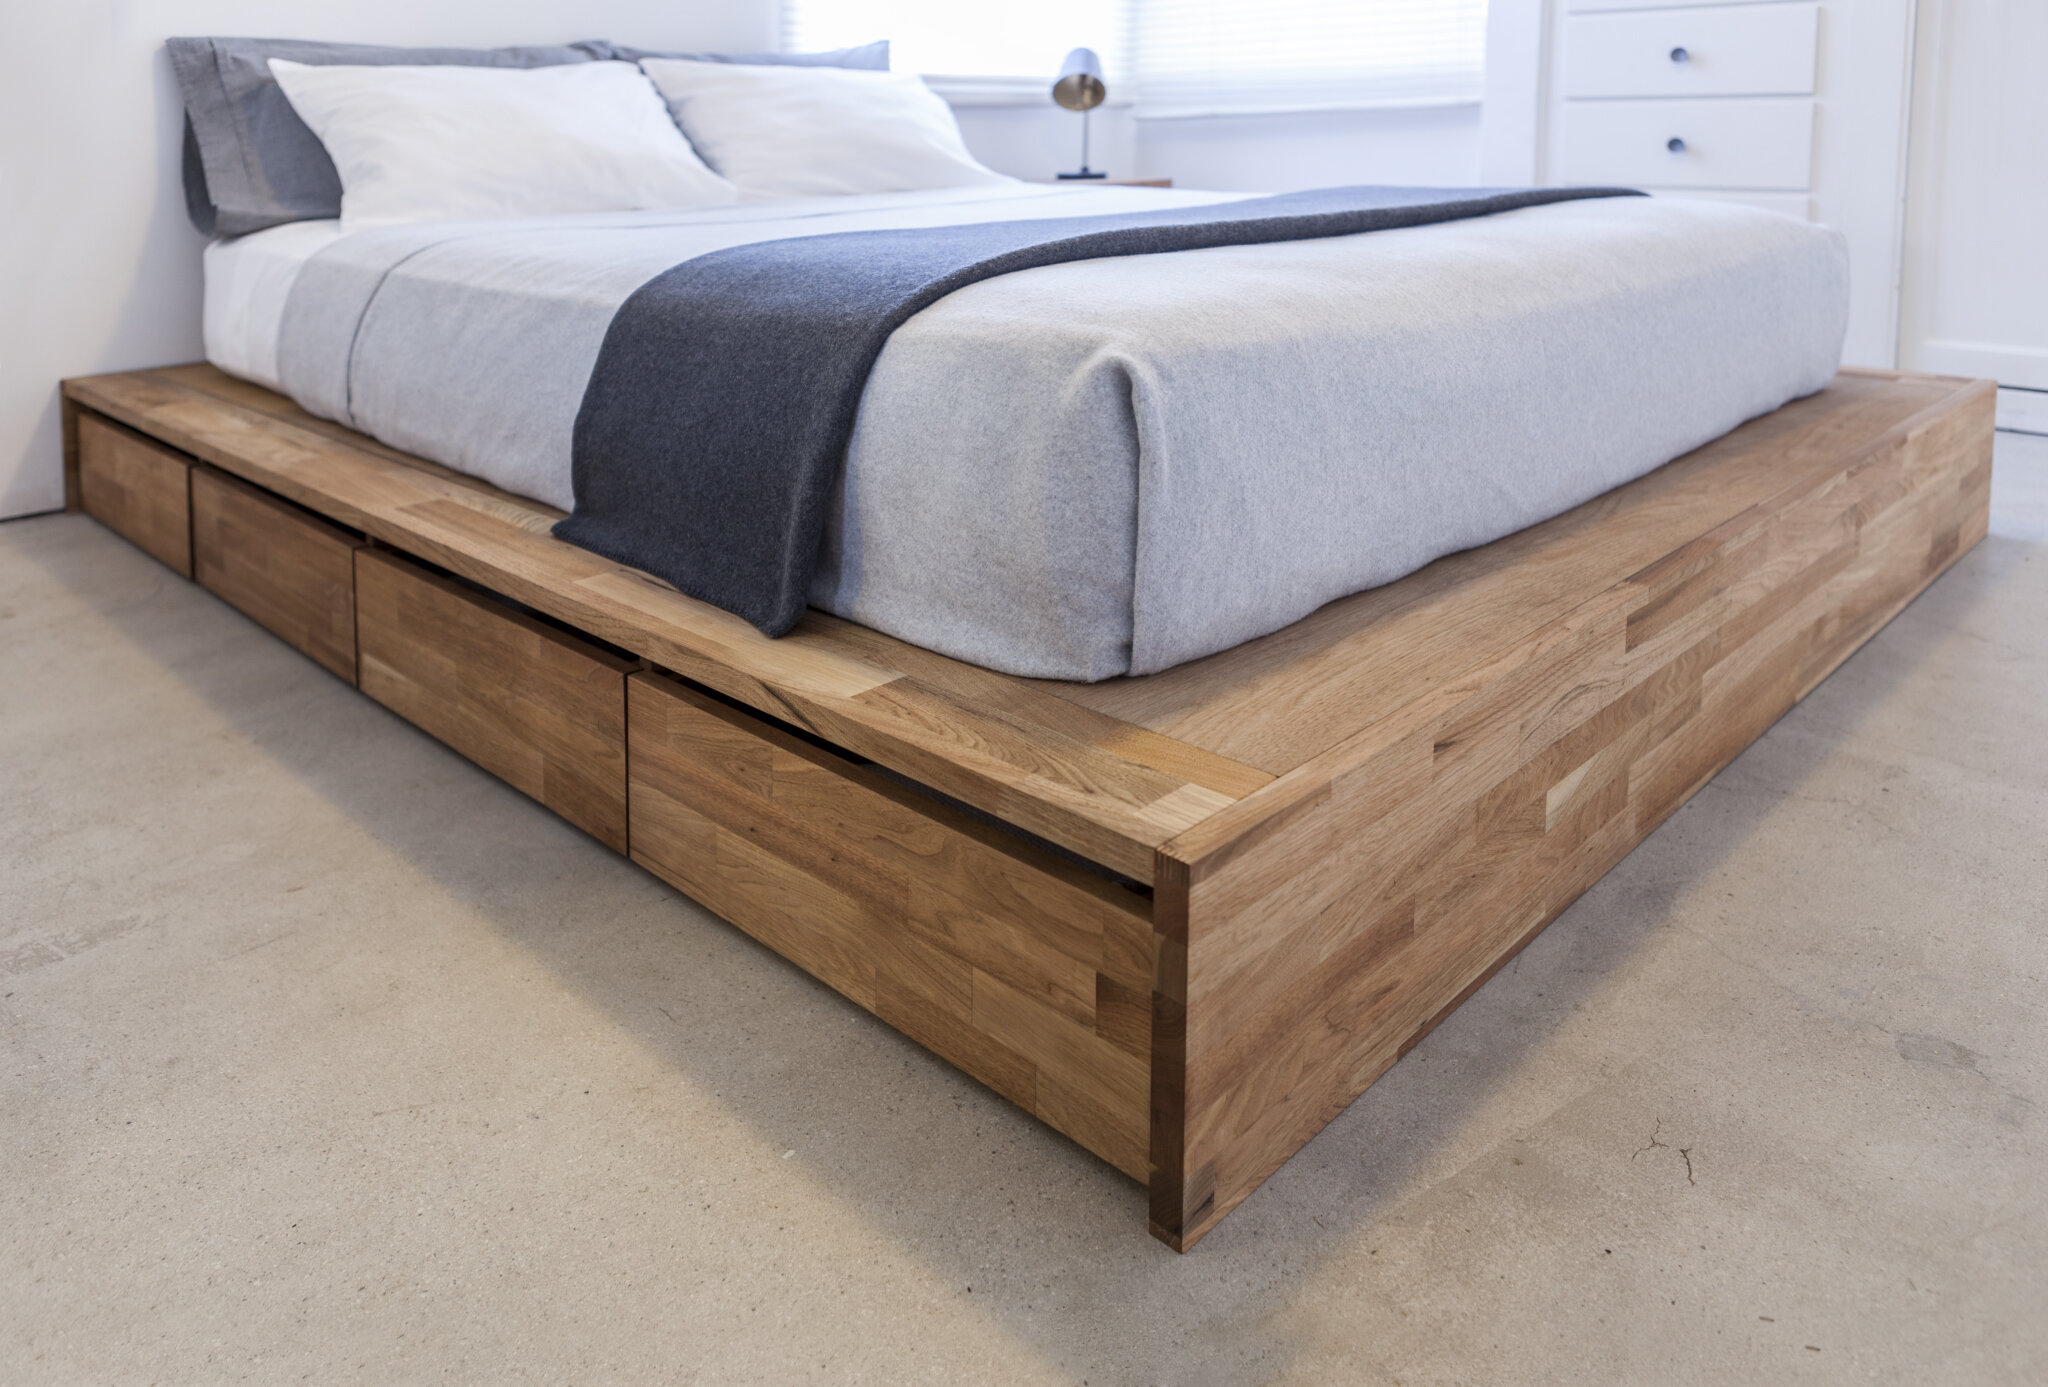 Bed With Drawers Underneath Visualhunt, How To Make A Platform Bed With Drawers Underneath